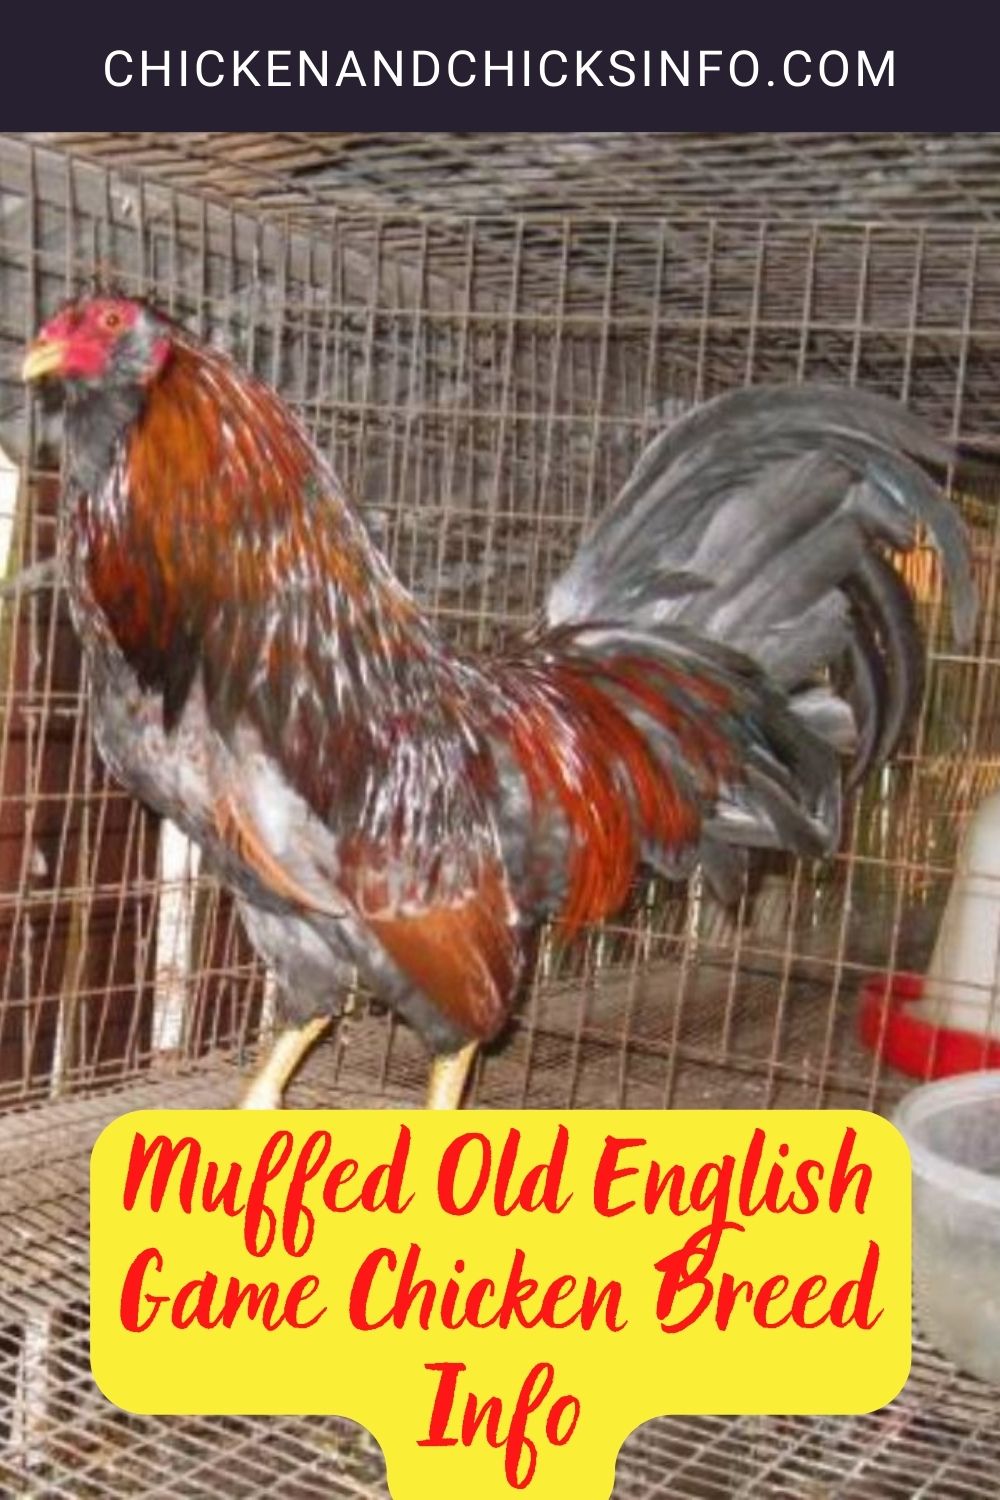 Muffed Old English Game Chicken Breed Info pinterest image.